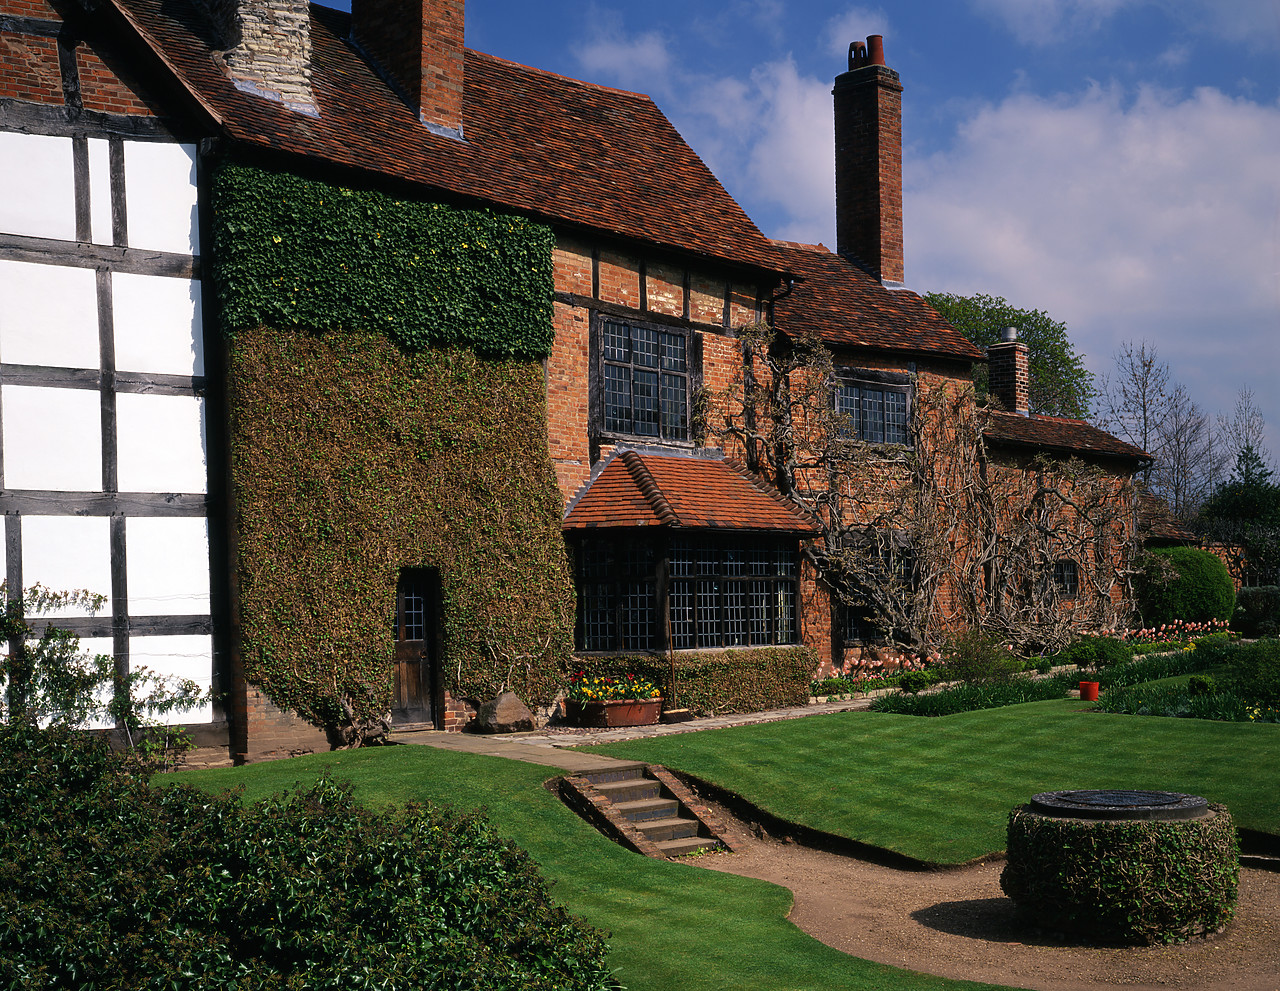 #200042-1 - New Place (shakespeare's Last Home) Stratford-upon-Avon, Warwickshire, England